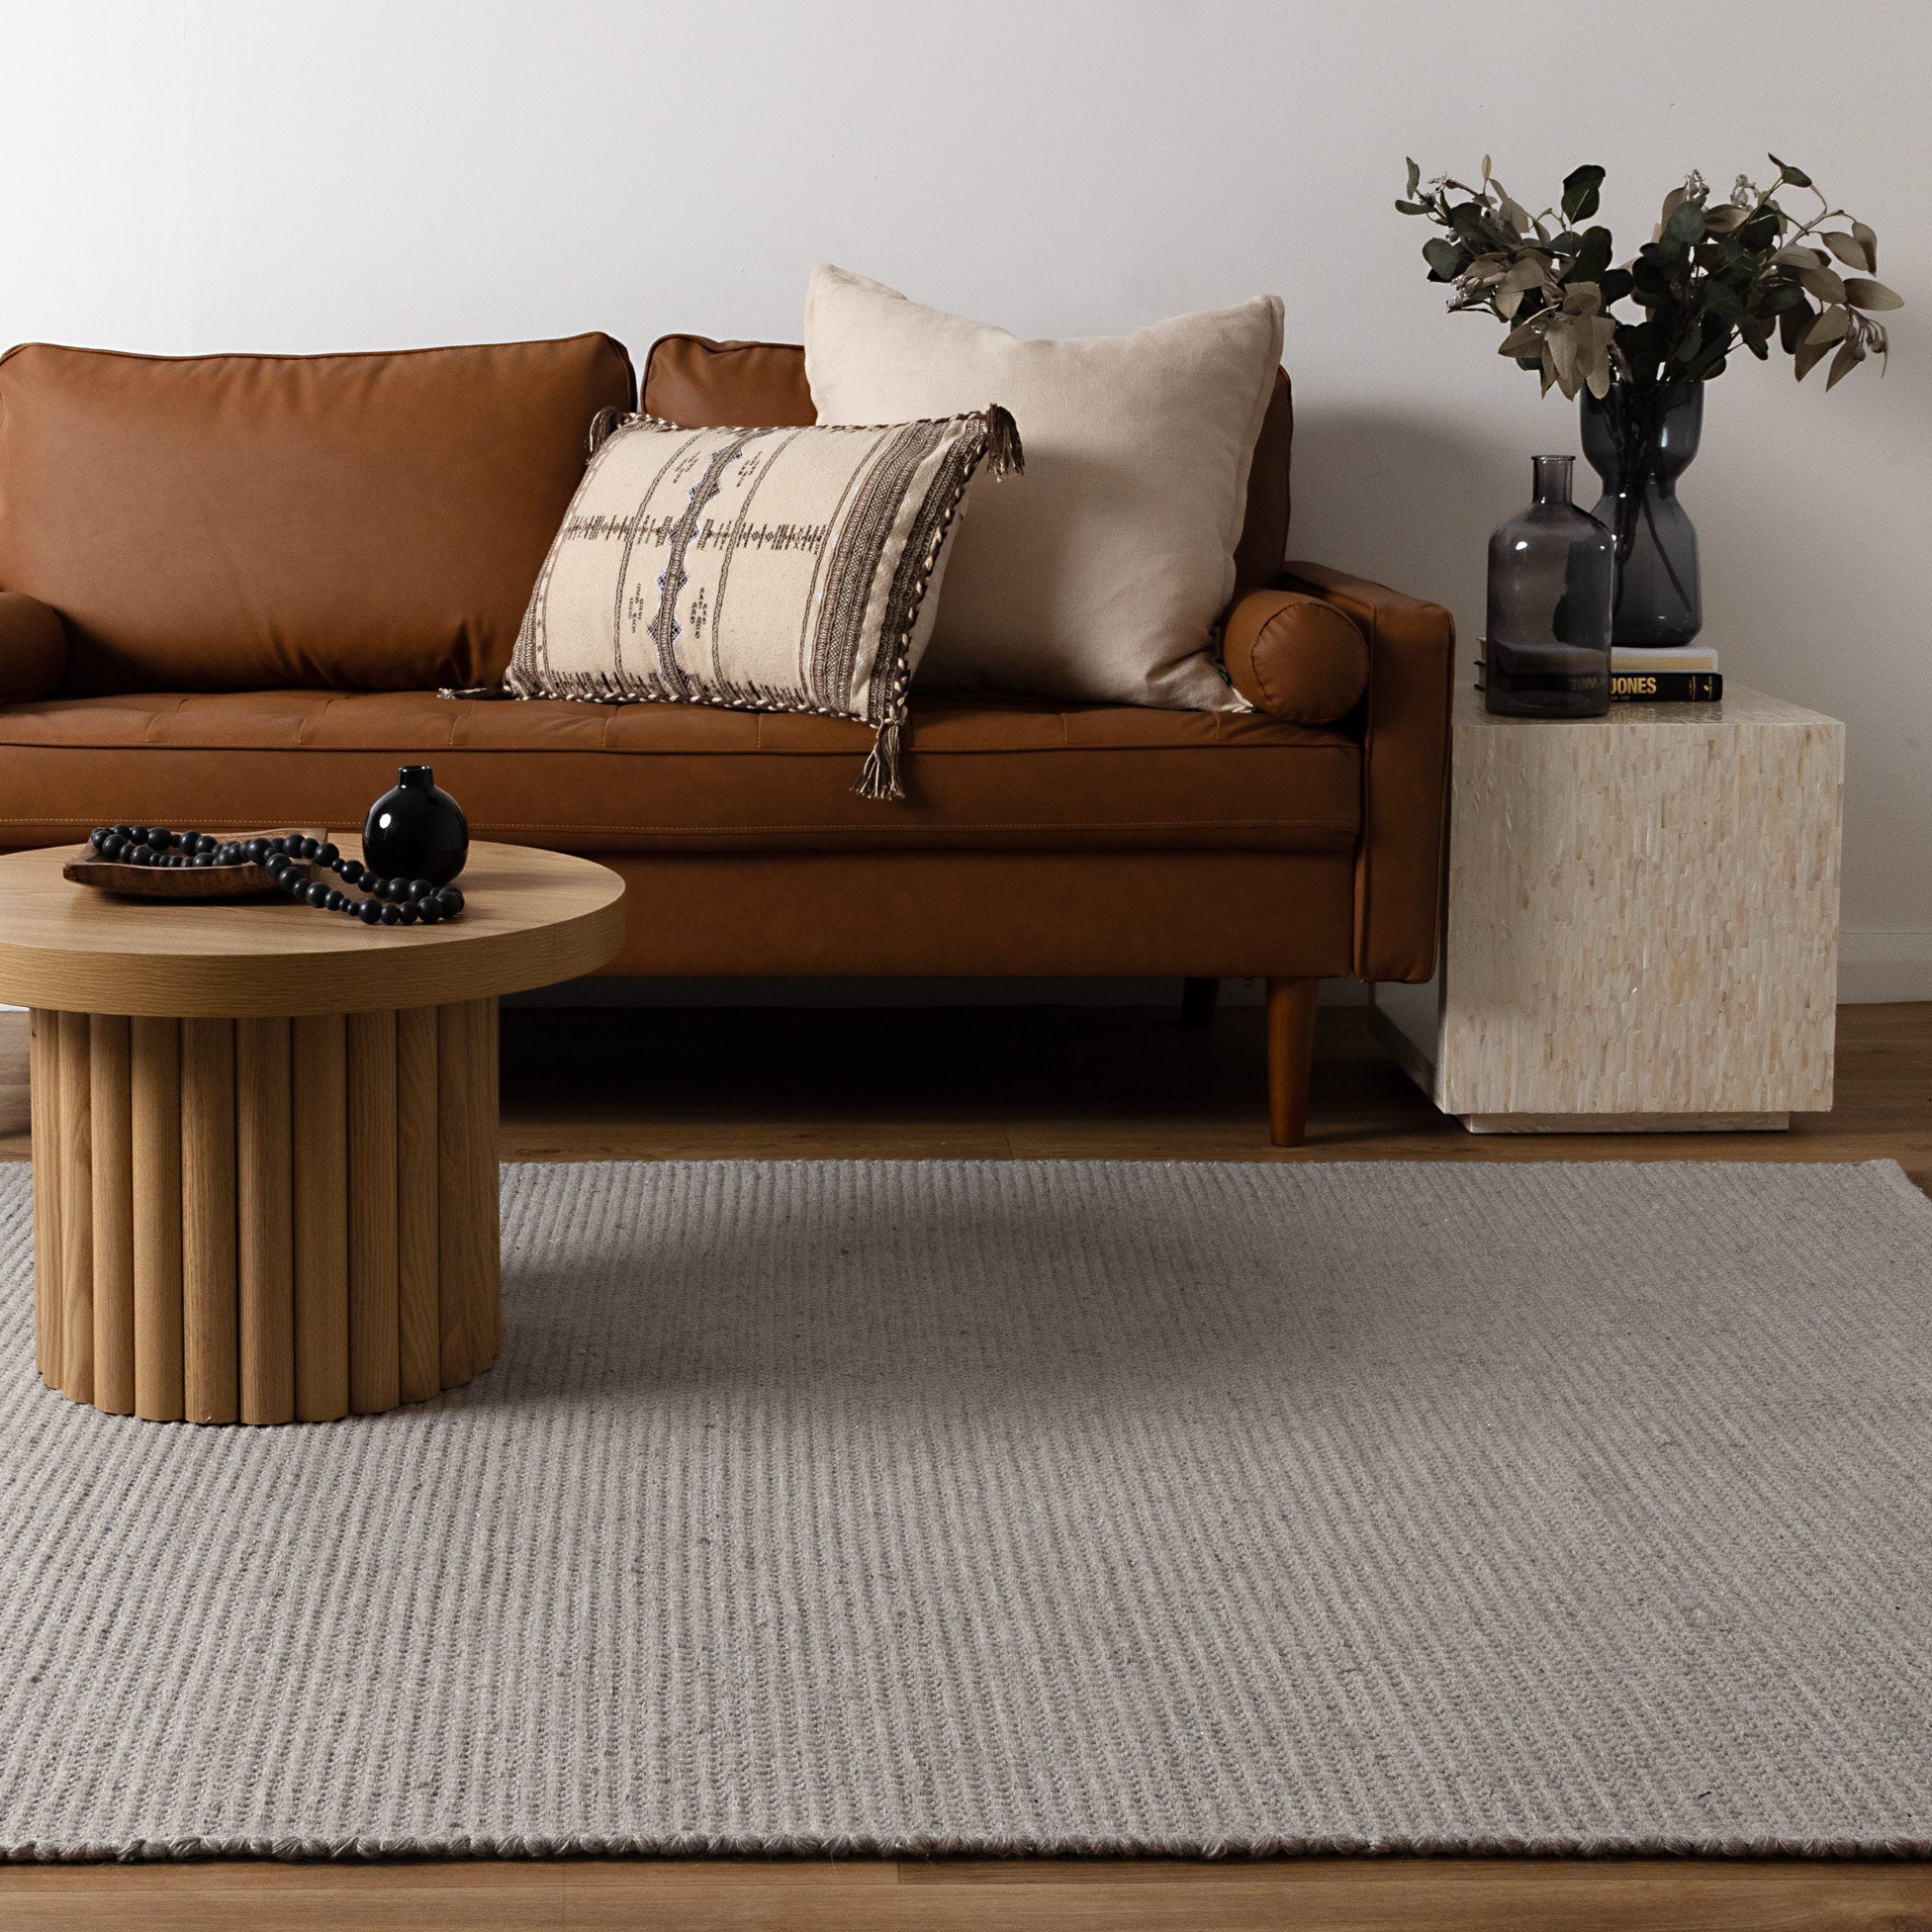 Natura Grey Wool Rug in living room with tan leather sofa